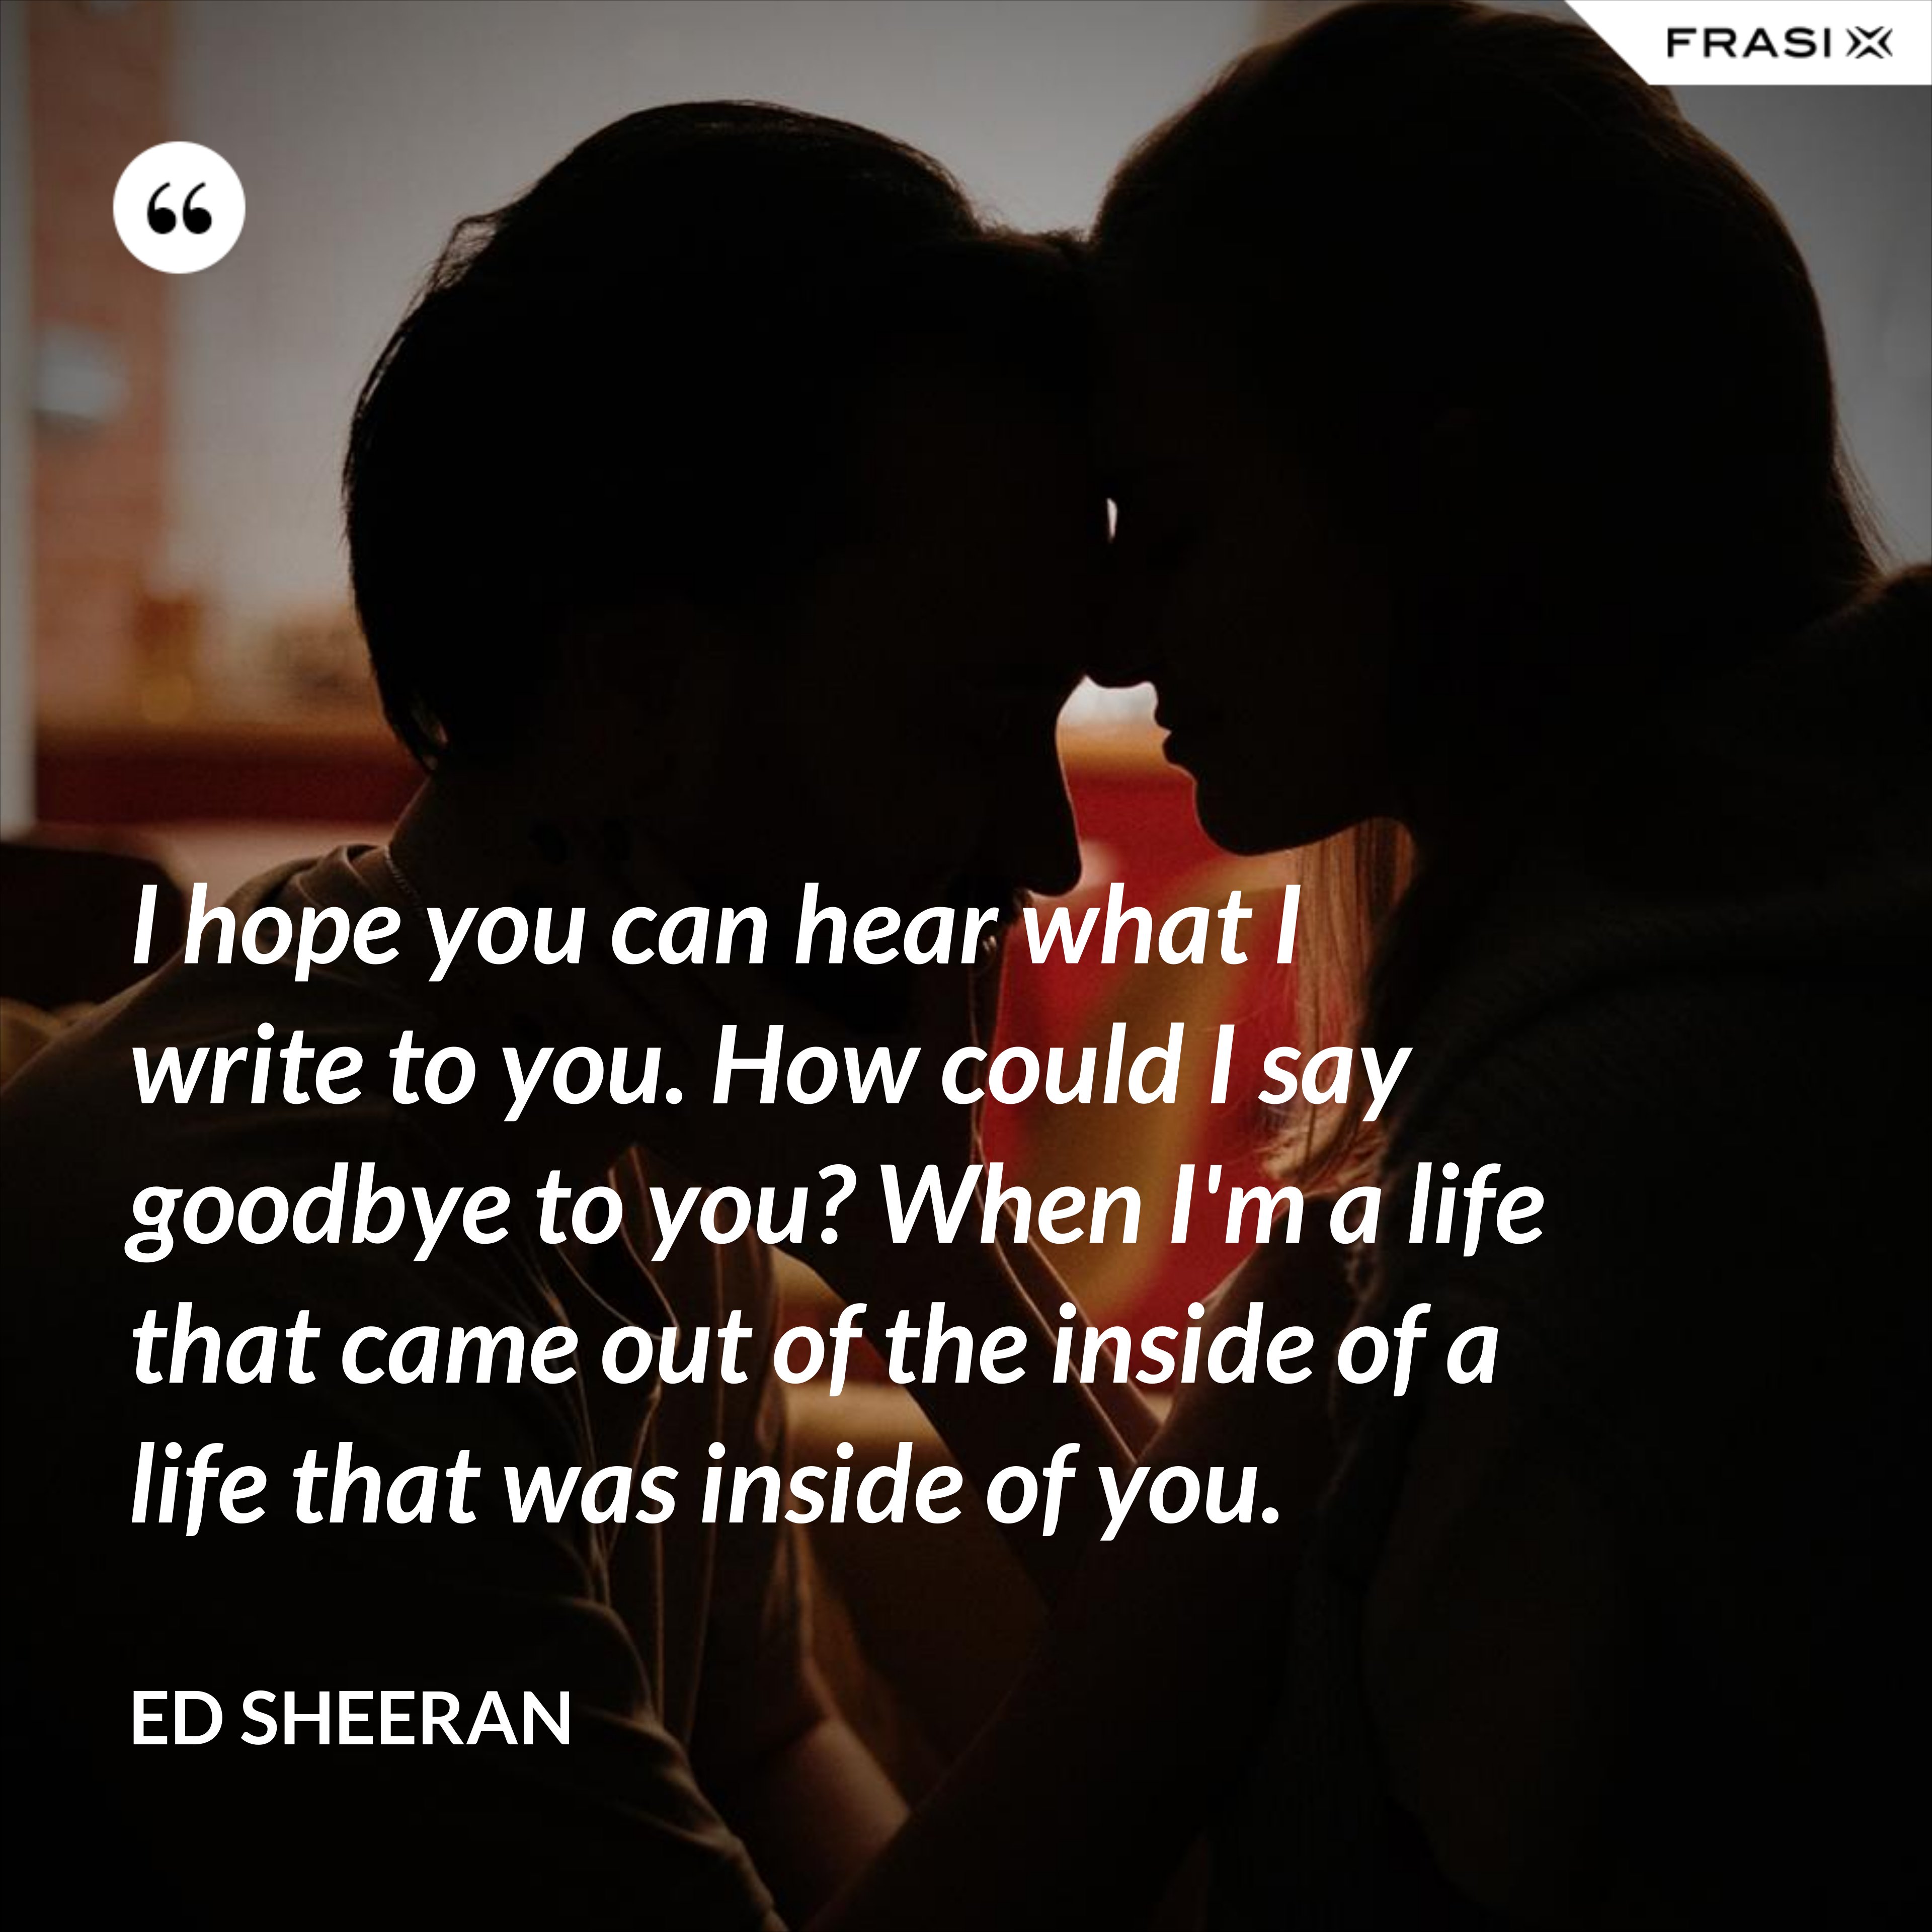 I hope you can hear what I write to you. How could I say goodbye to you? When I'm a life that came out of the inside of a life that was inside of you. - Ed Sheeran